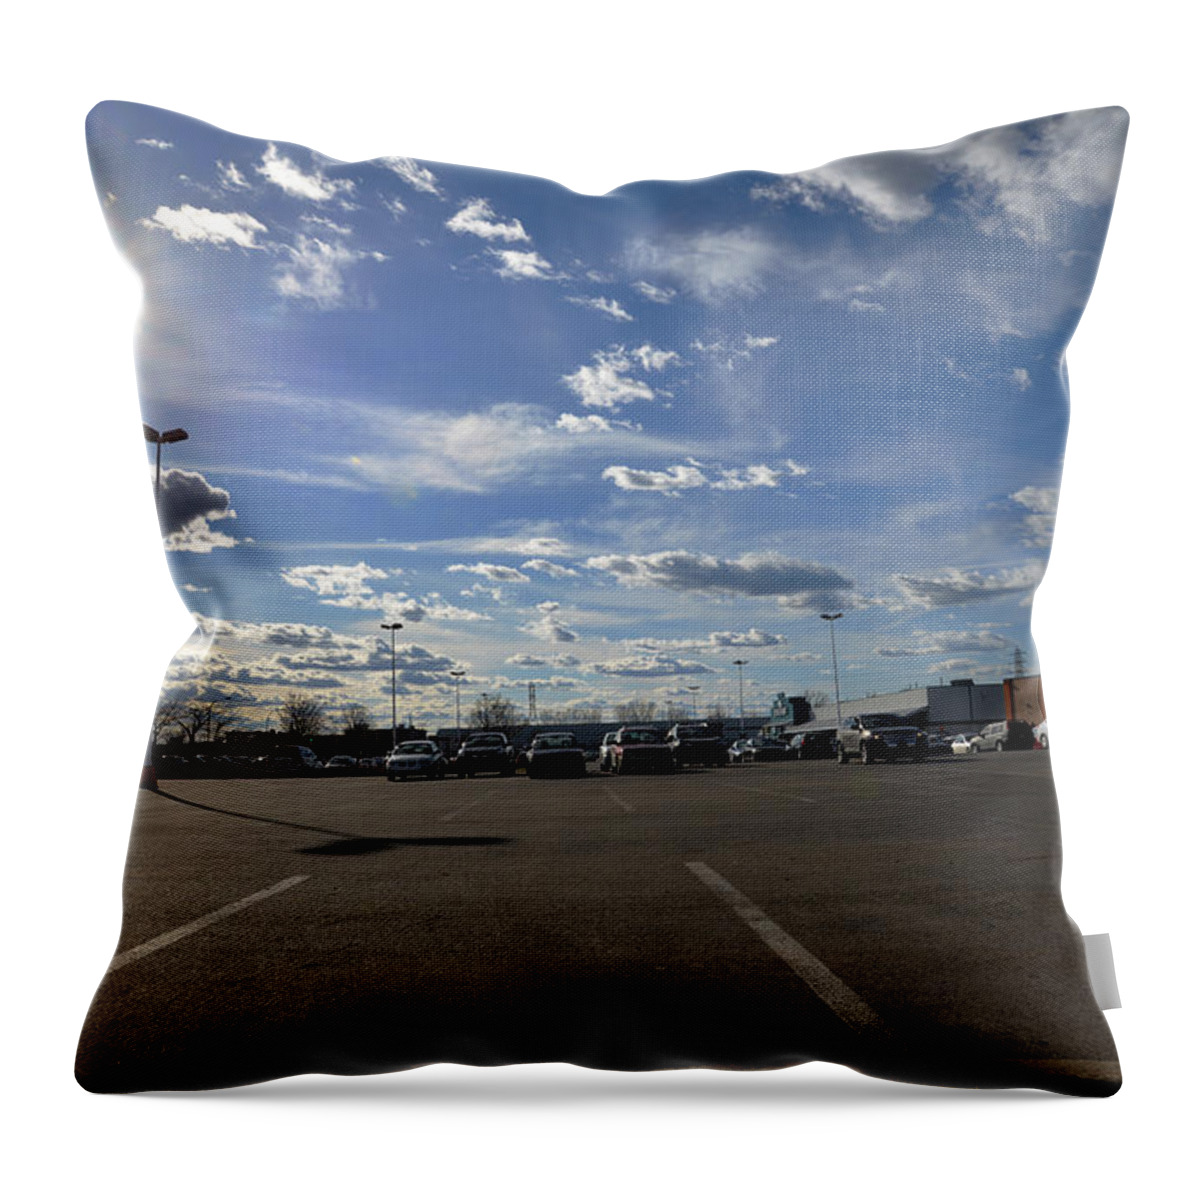 Parking Throw Pillow featuring the photograph Clouds And Parking Lot by Jean-Marc Robert